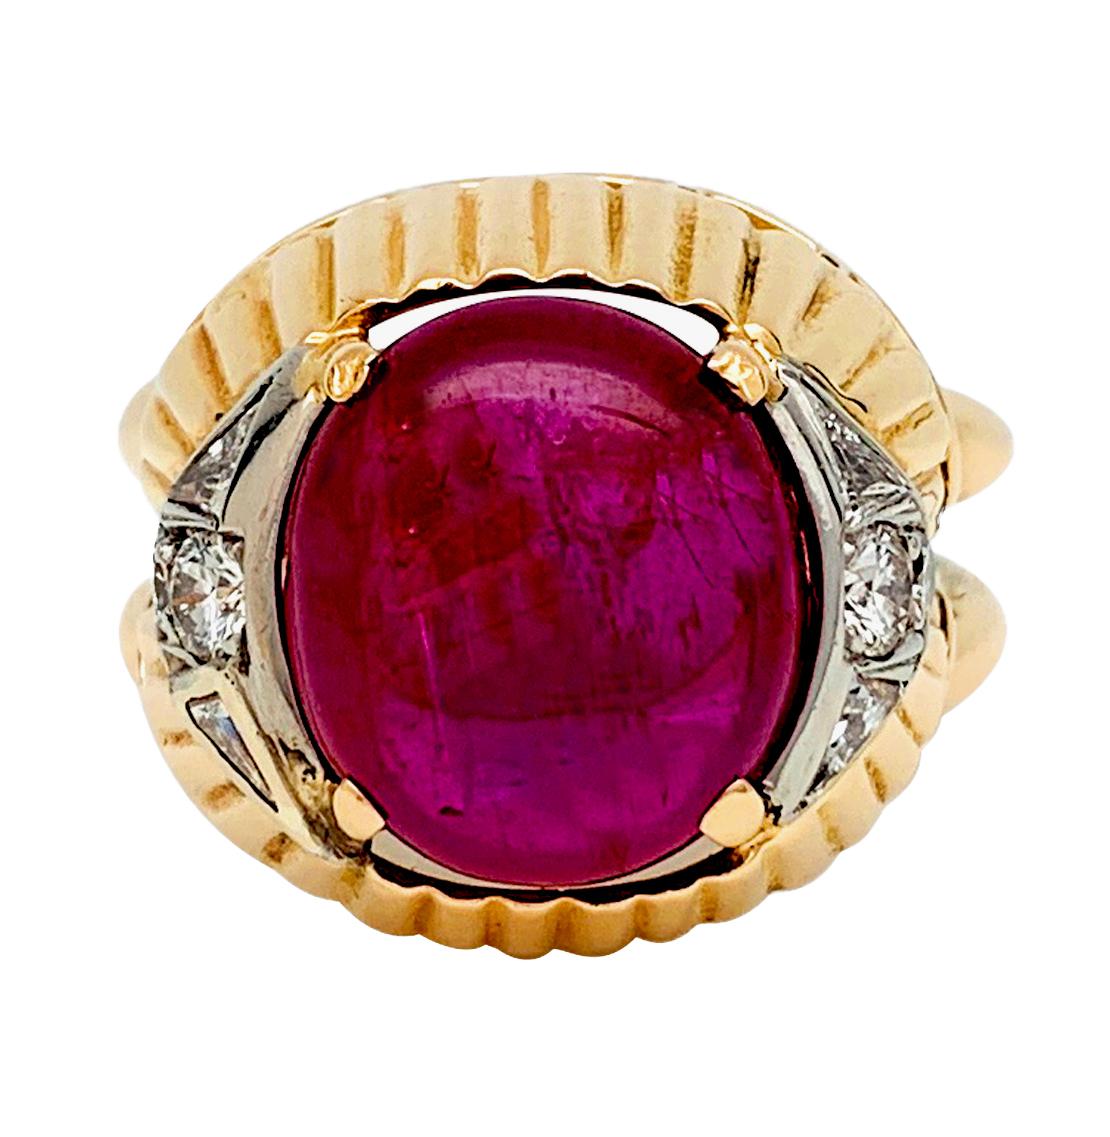 Baroque Burmese Ruby Cabochon on a 1950s Cocktail Ring